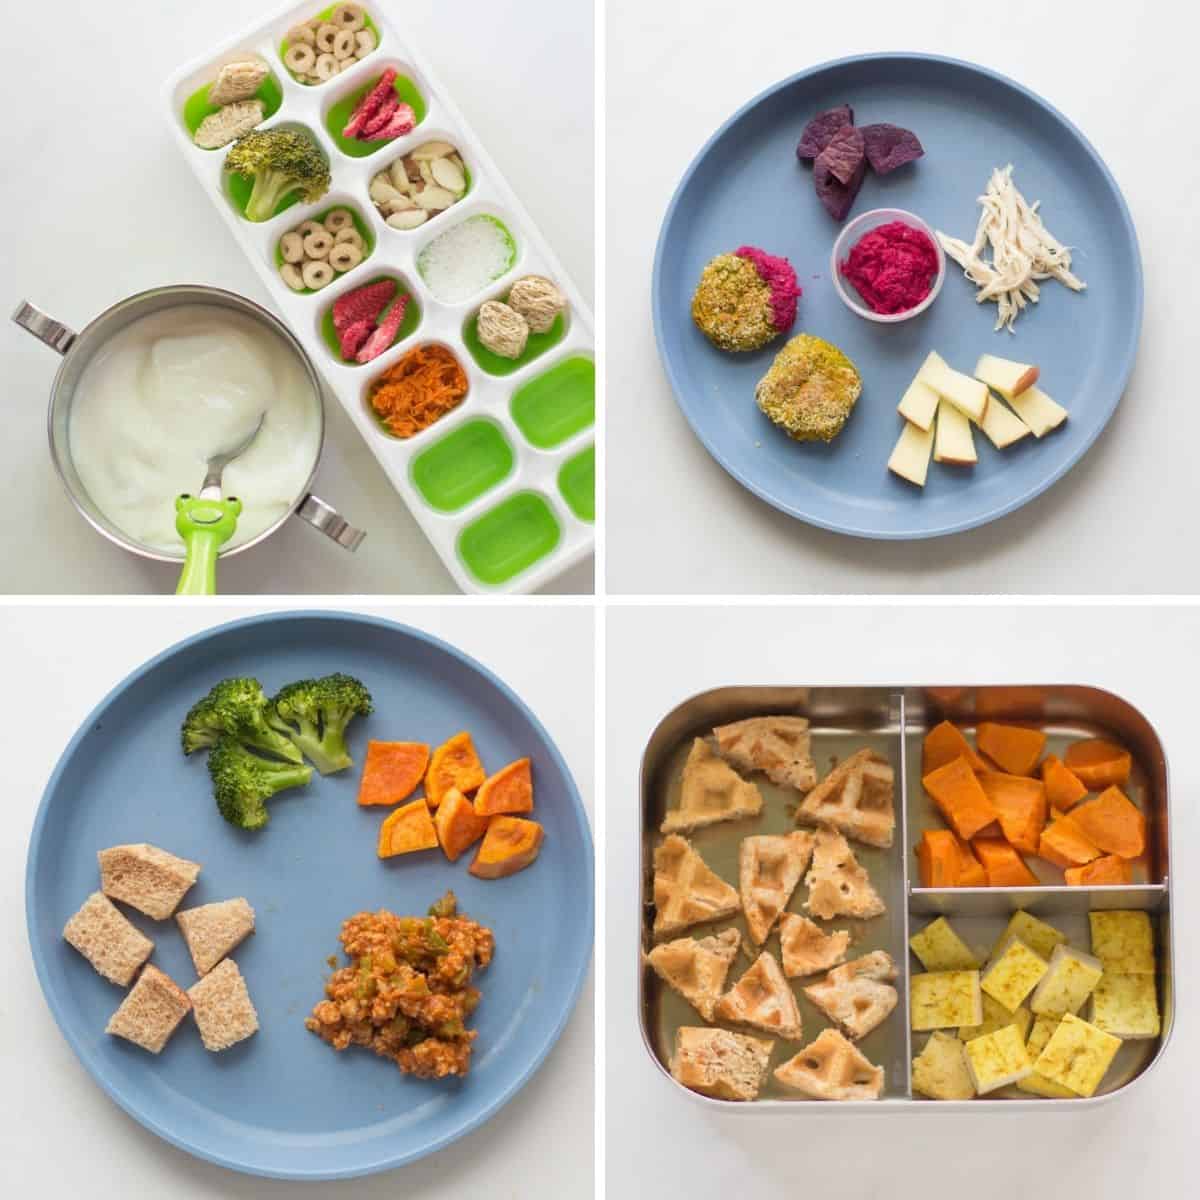 In a Rut? Here Are Some Toddler Meal Ideas